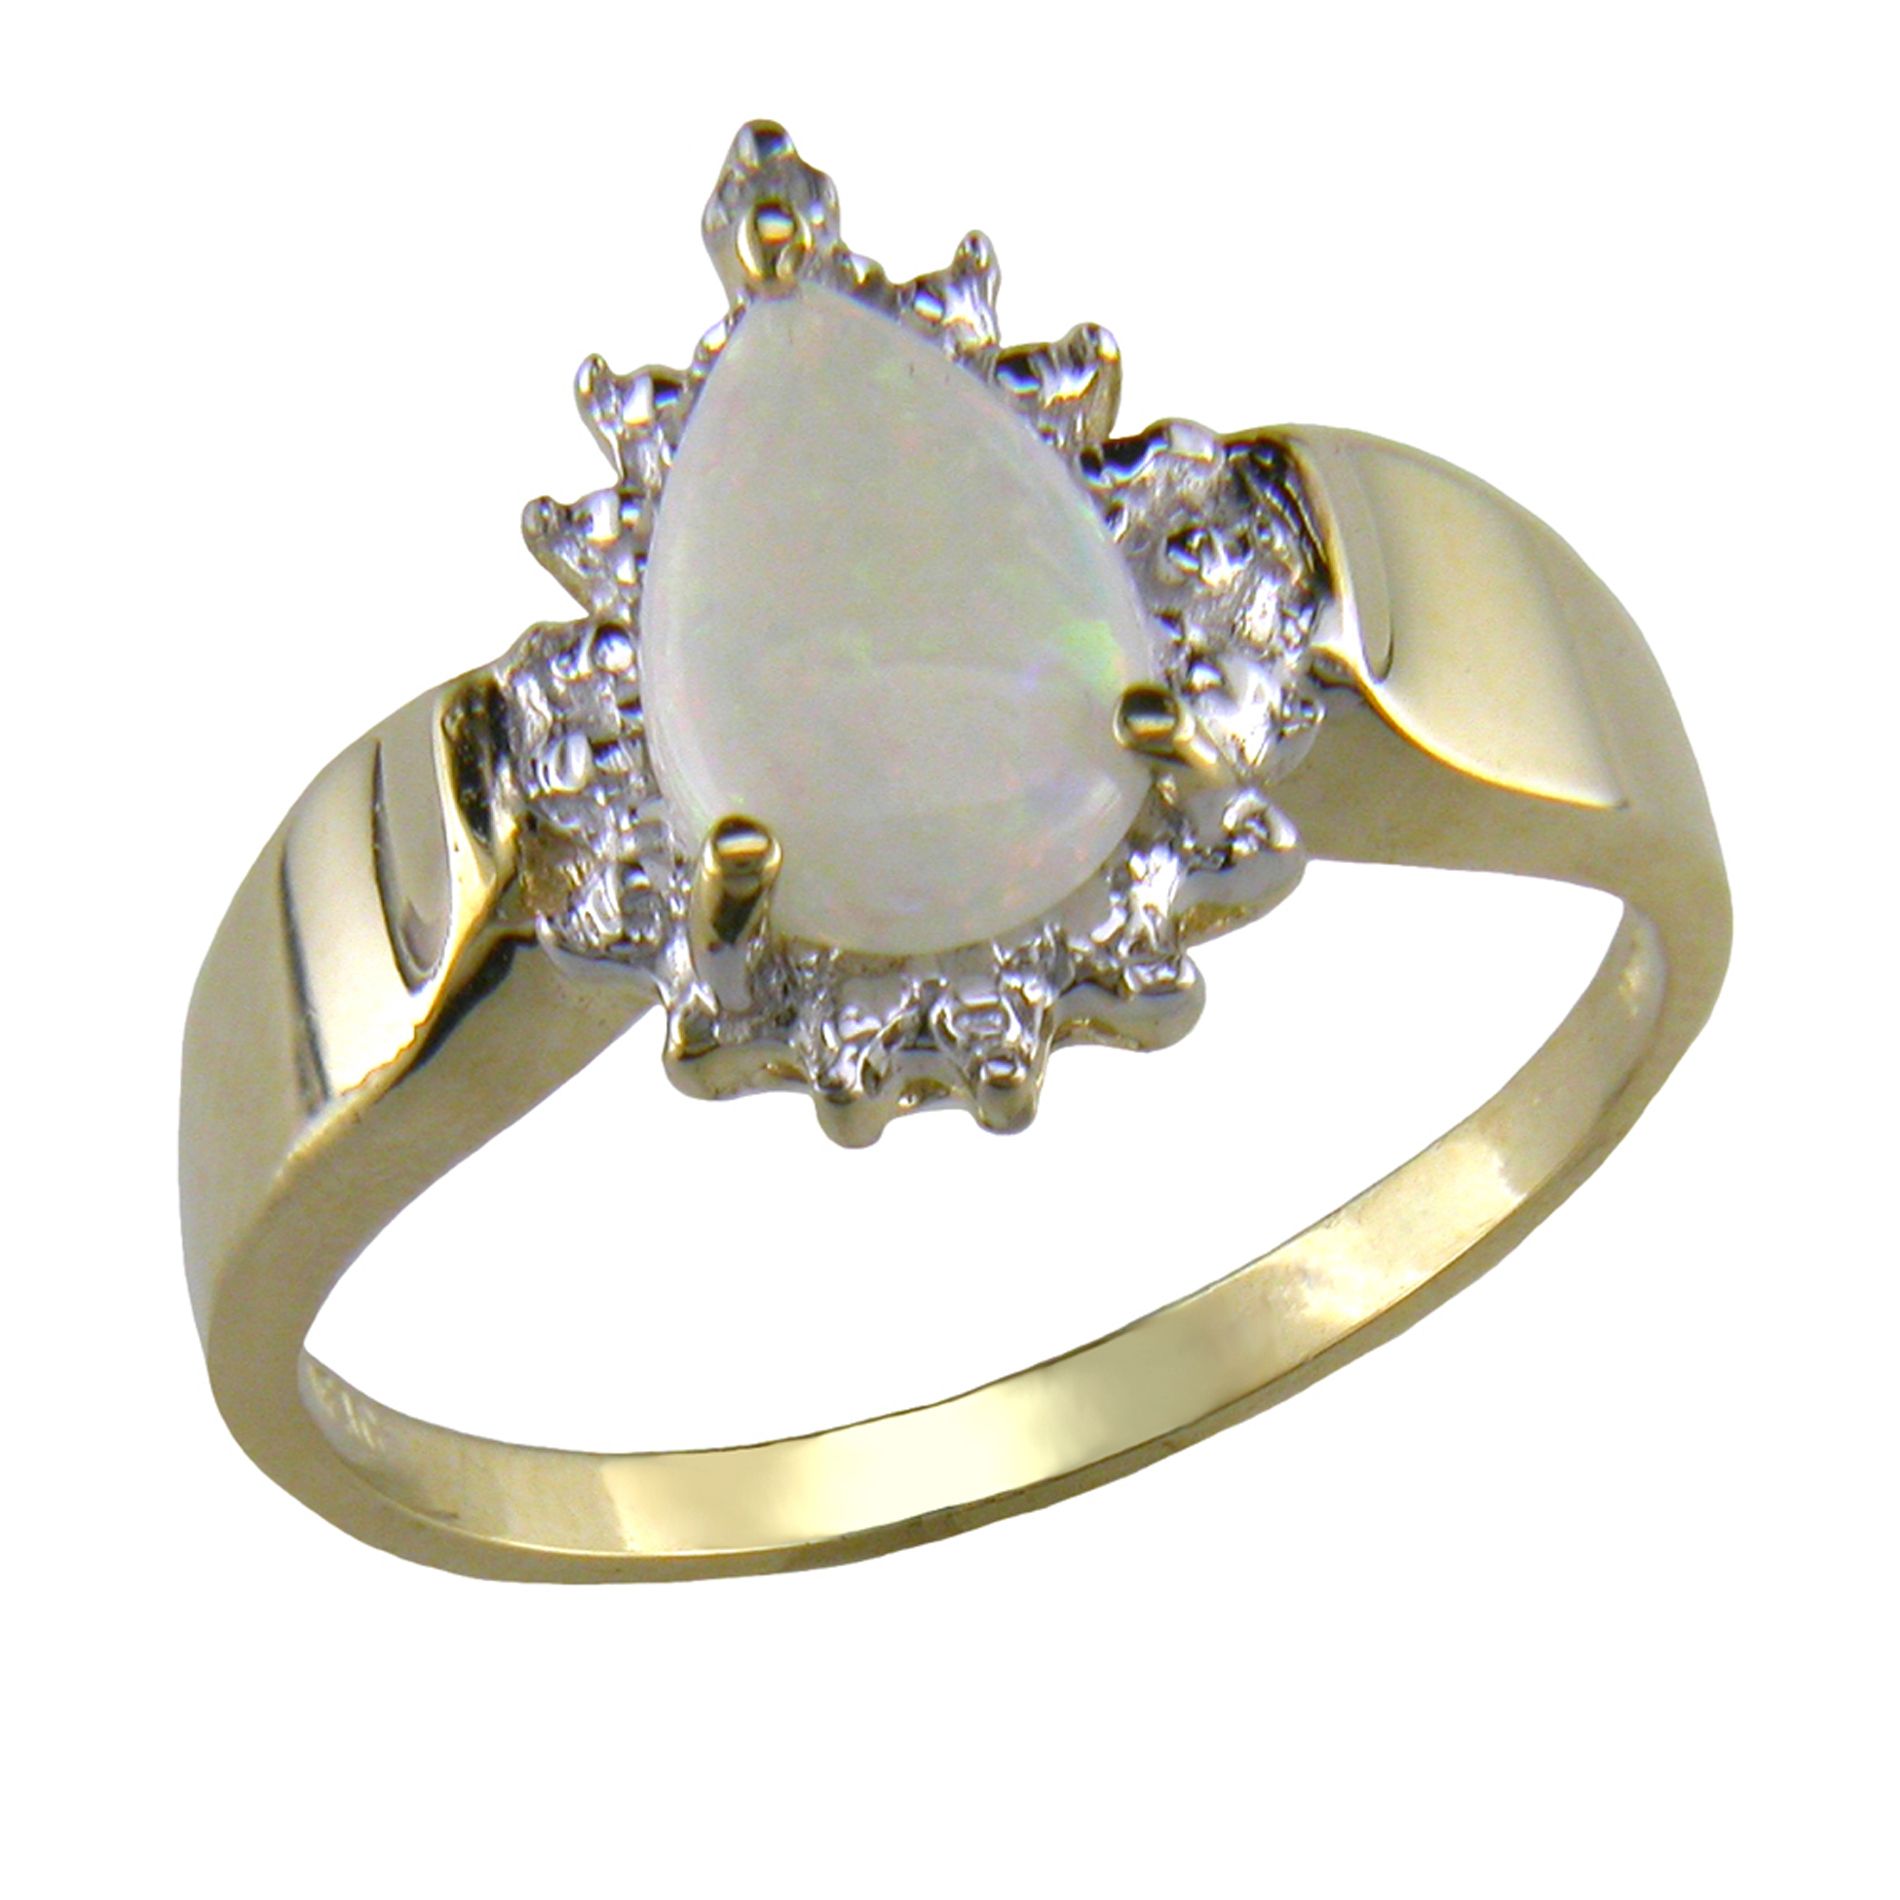 Opal and Diamond Ring. 10k Yellow Gold